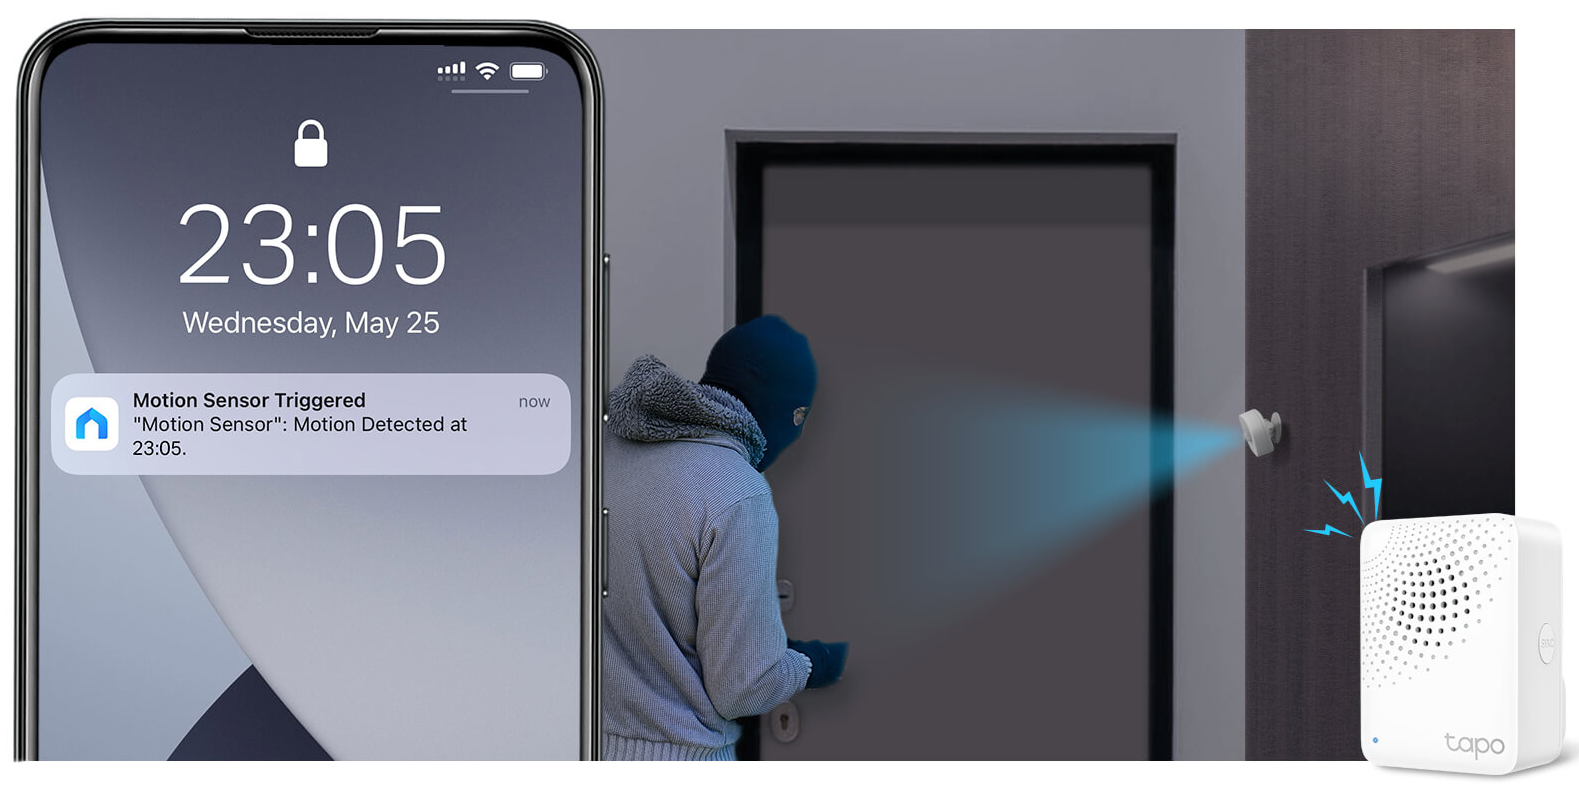 Guard Your Home While You’re Away
The motion sensor can trigger an alarm to deter intruders if it notices anything amiss when you’re not home. Receive a notification on your phone as soon as motion is detected.
*Tapo Hub sold separately.